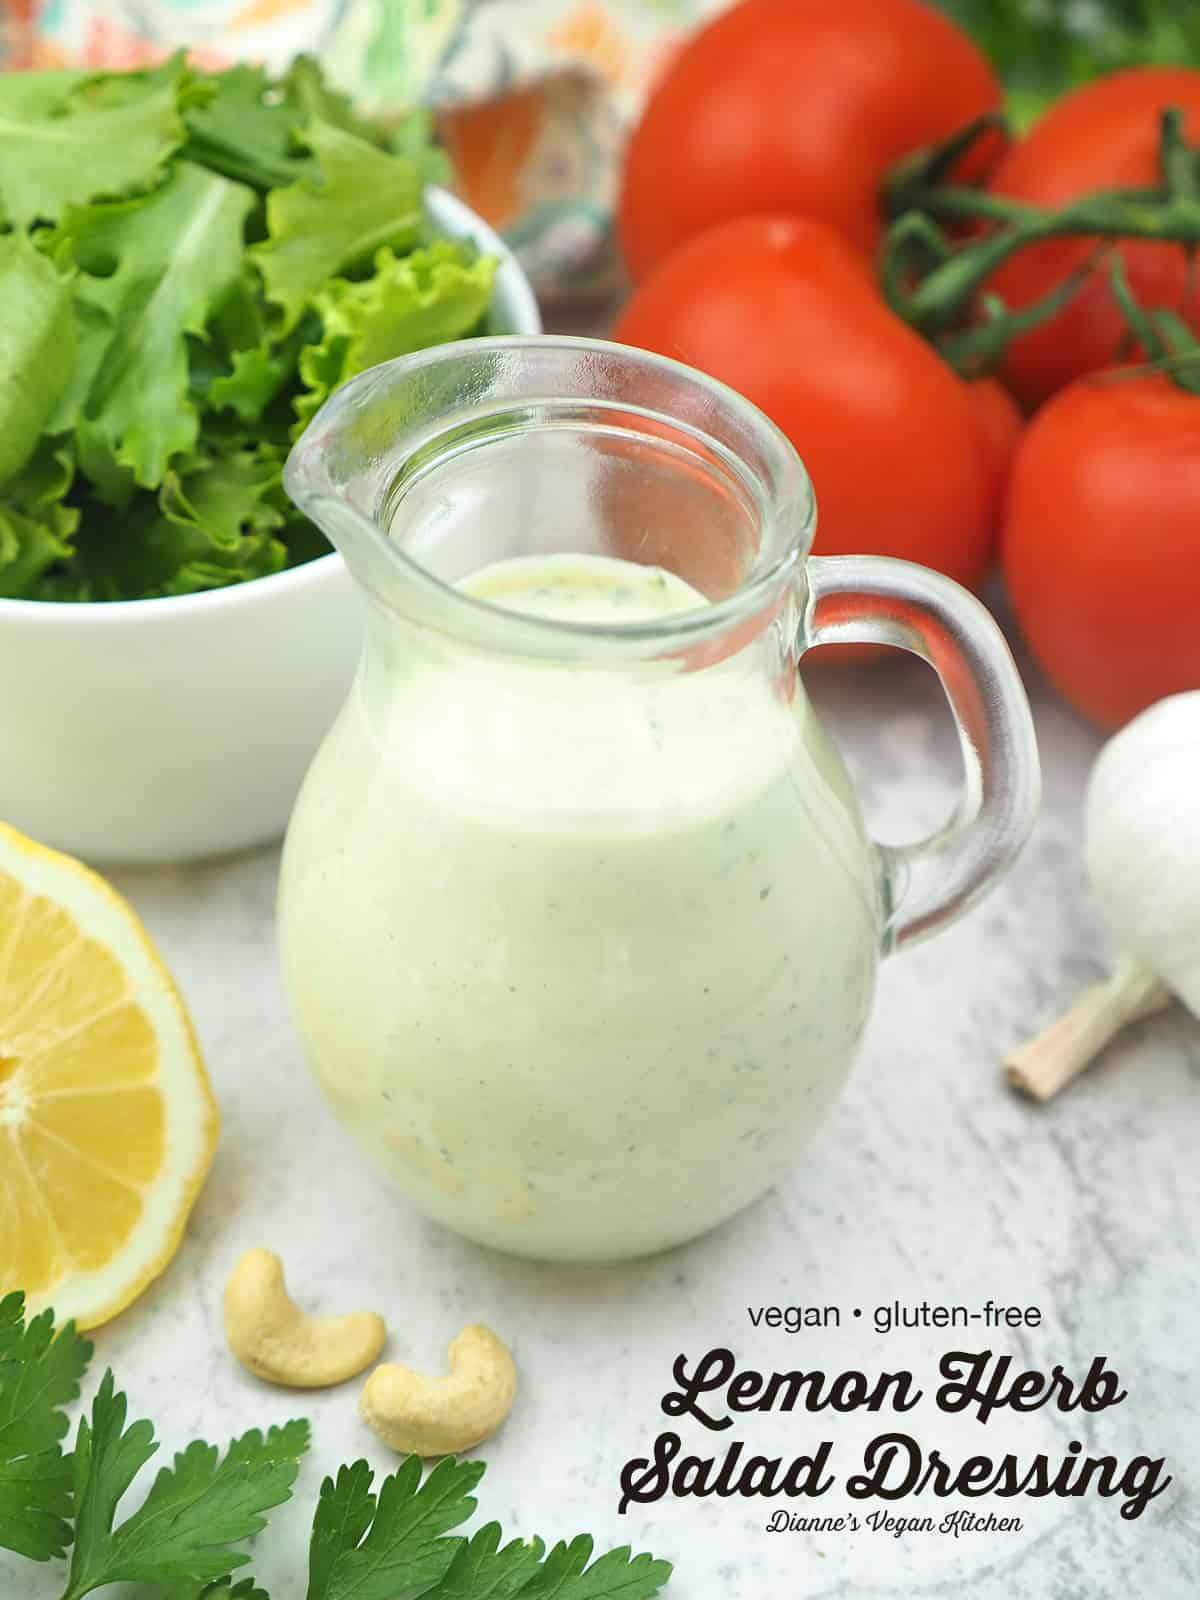 Lemon Herb Salad Dressing with text overlay